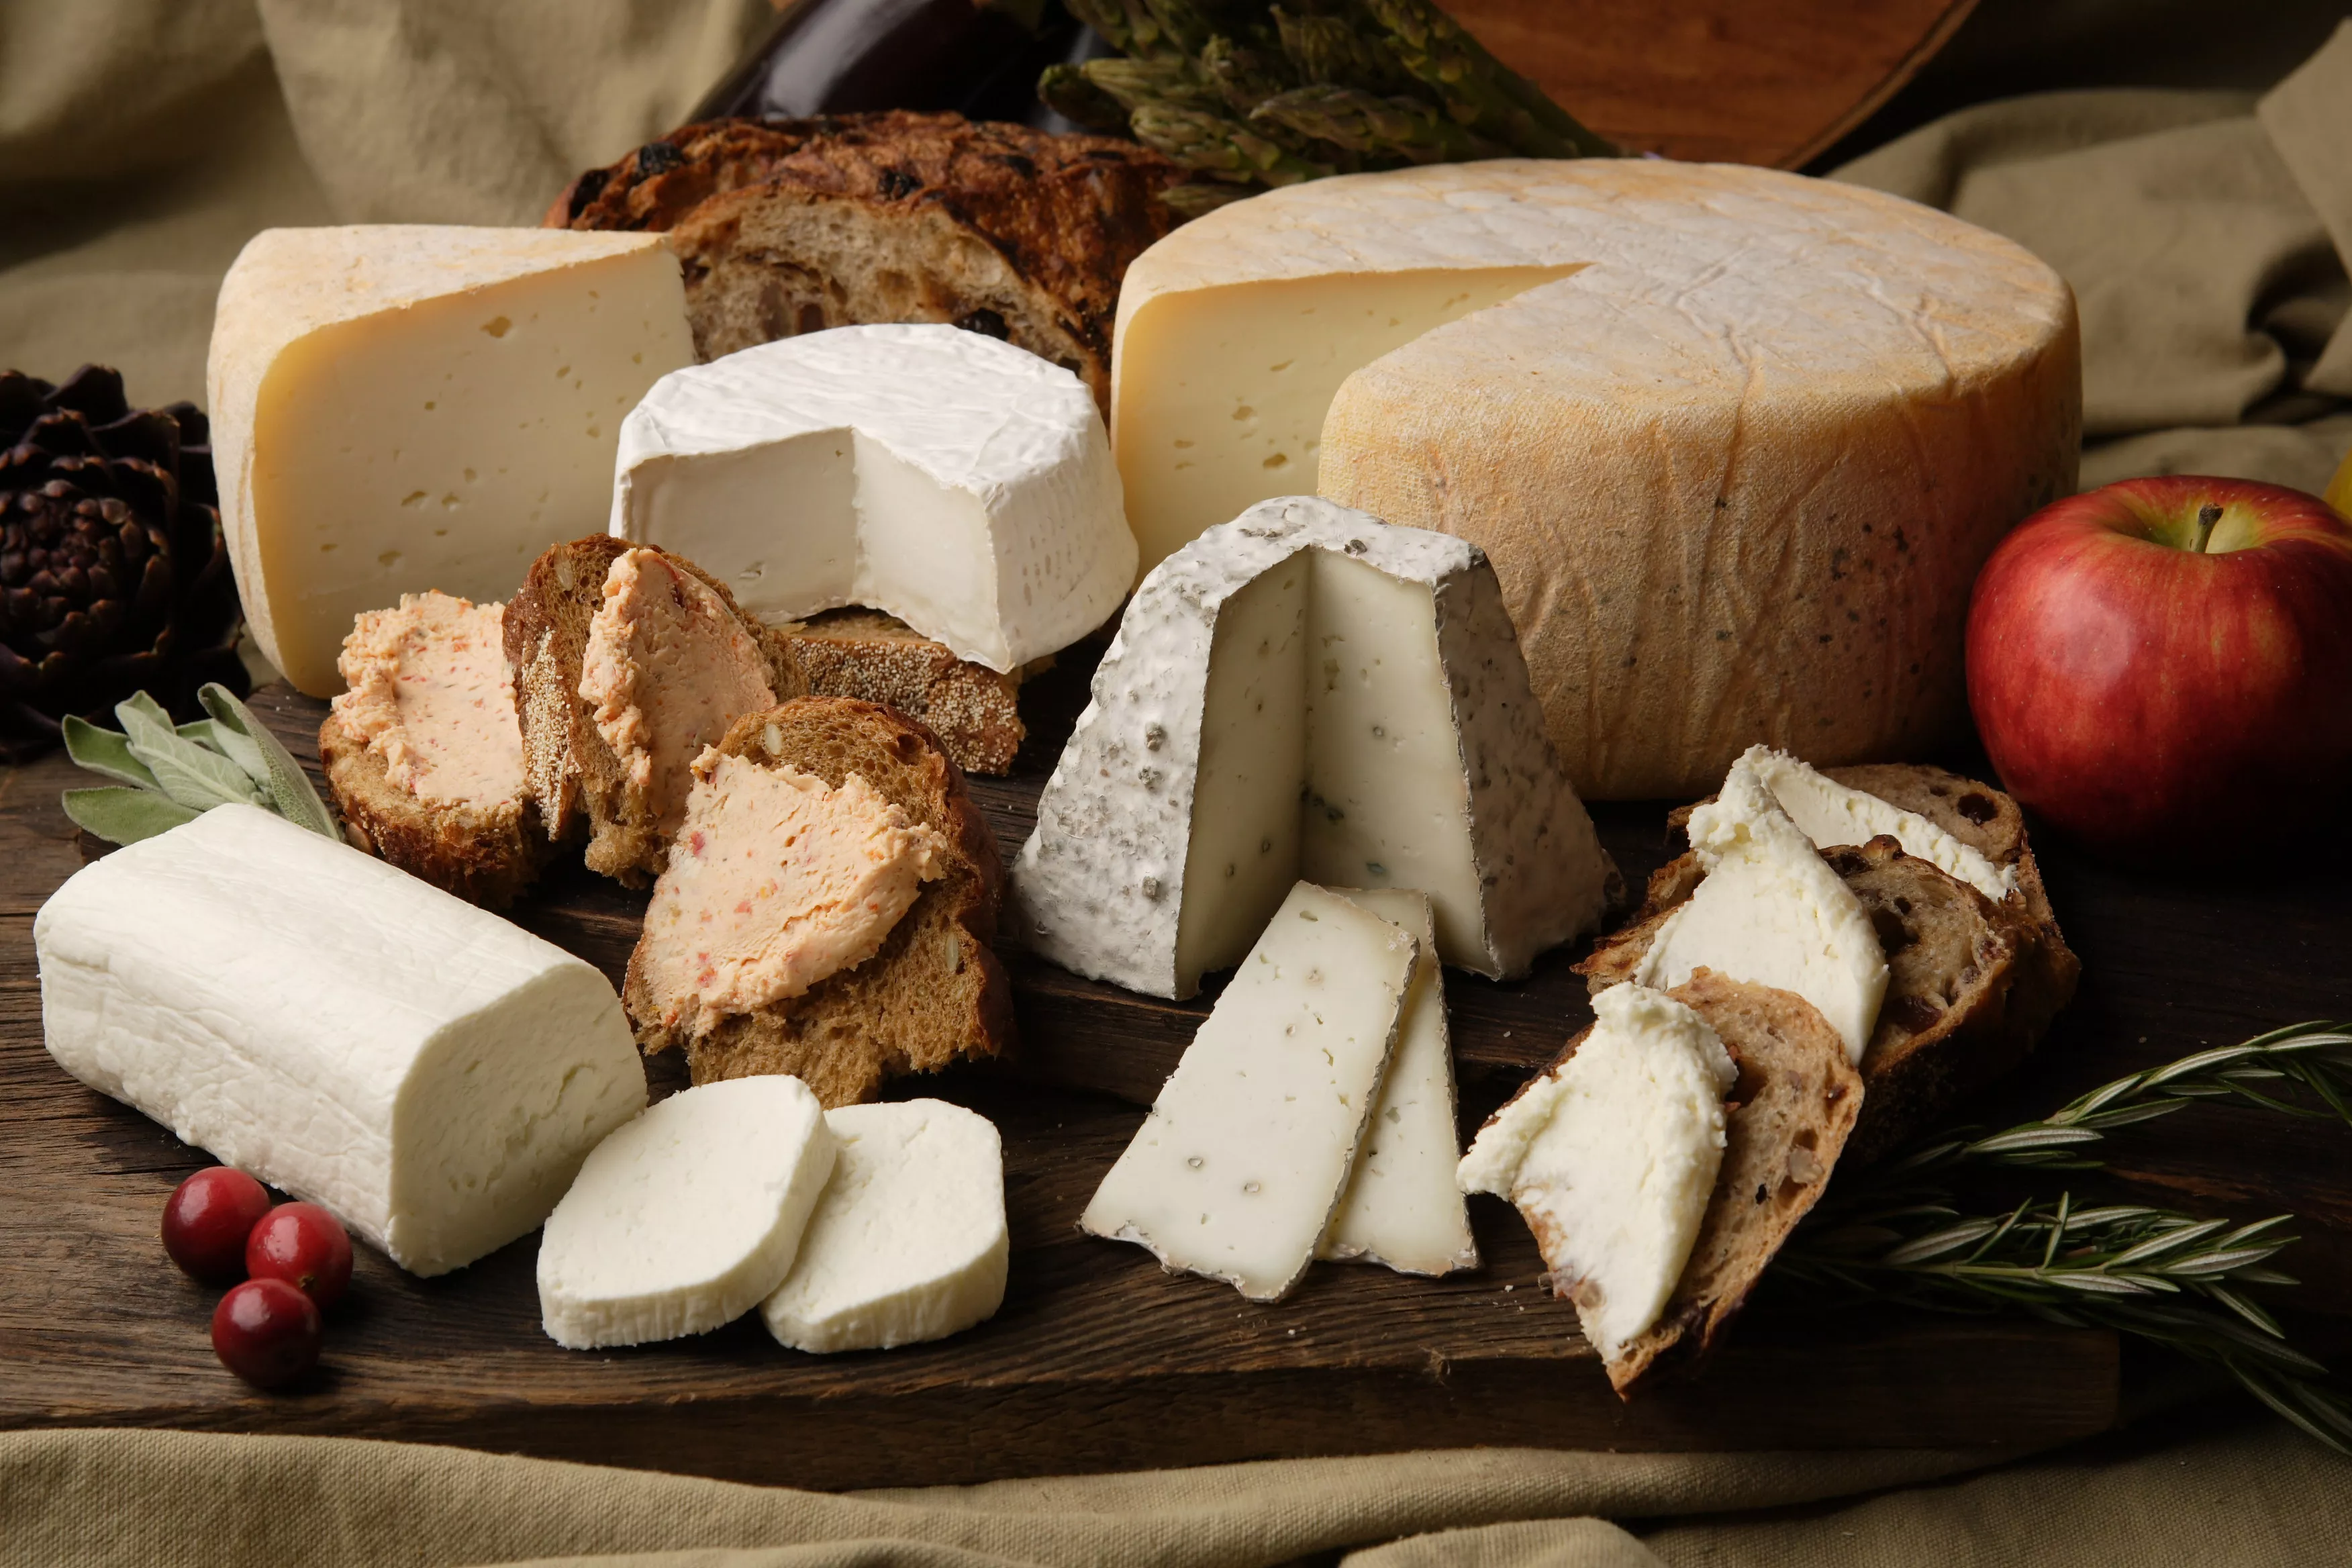 Latteria Perenzin in Italy, Europe | Cheesemakers - Rated 1